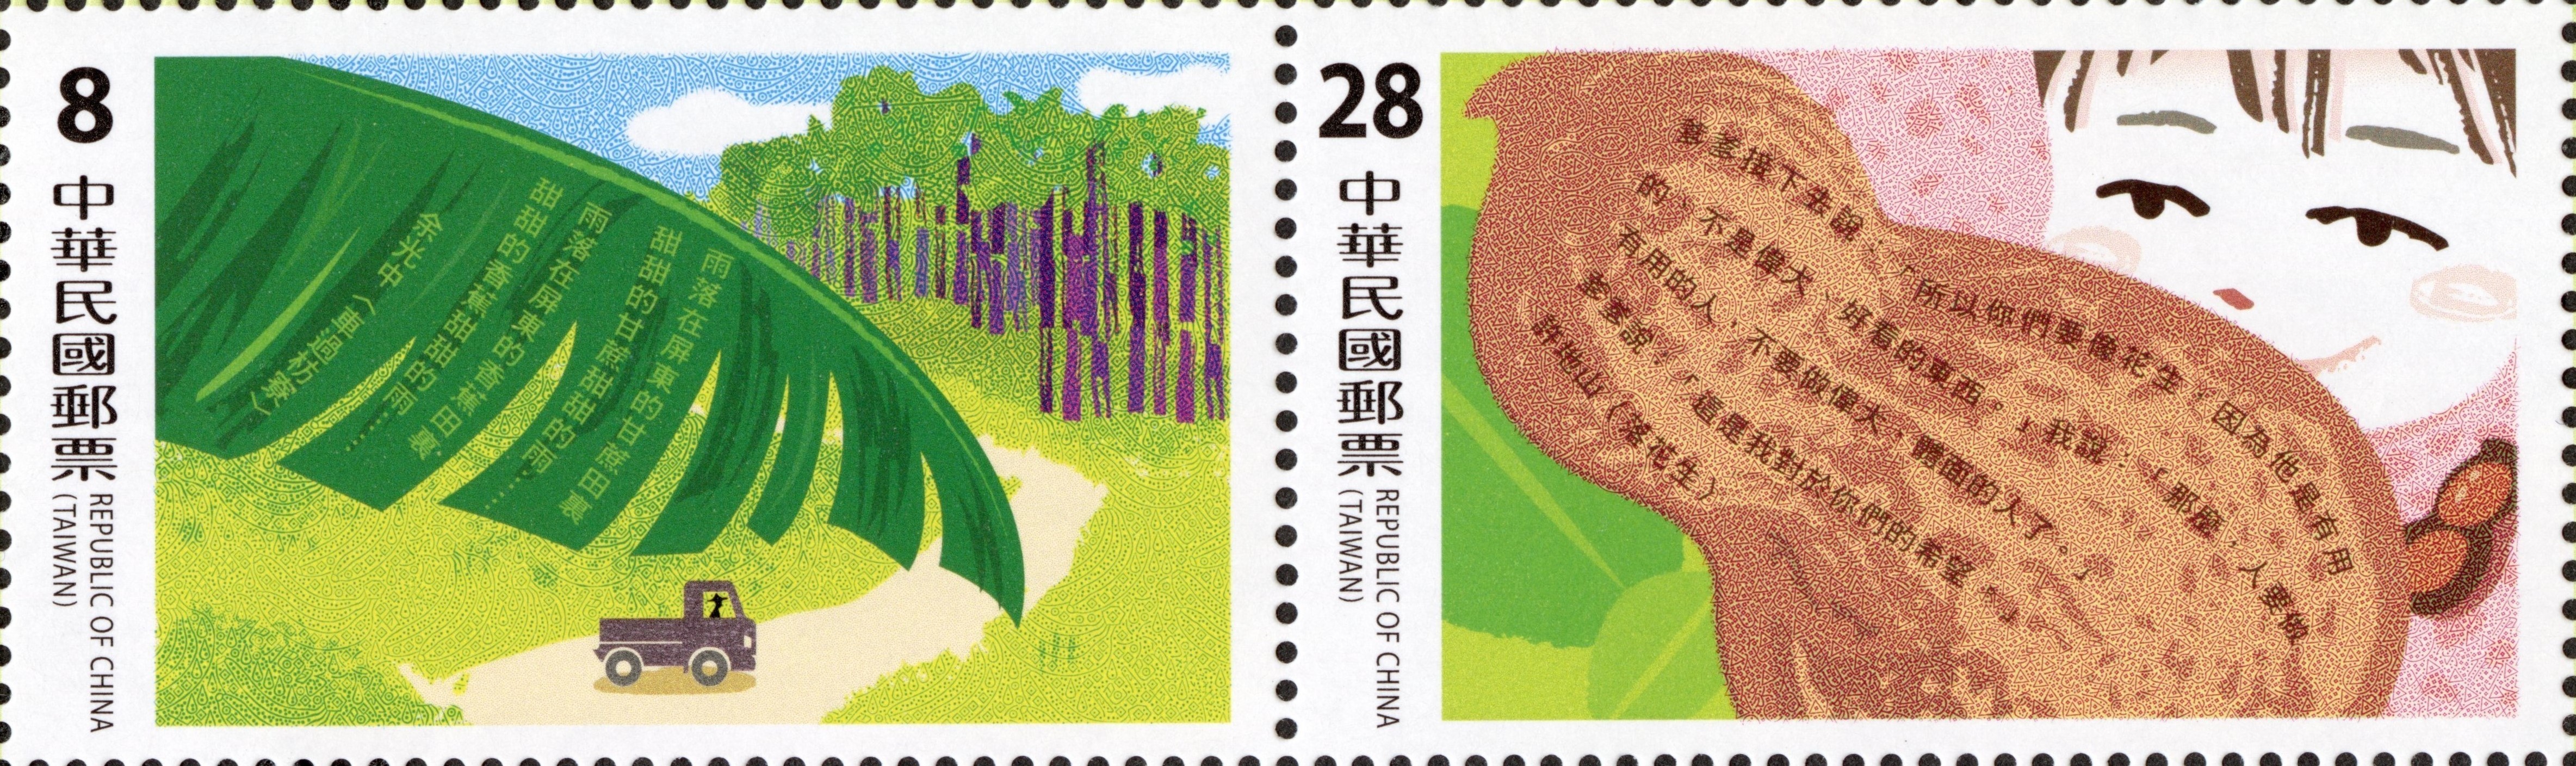 TAIPEI 2023–39th Asian International Stamp Exhibition Postage Stamps: Taiwan in Literature